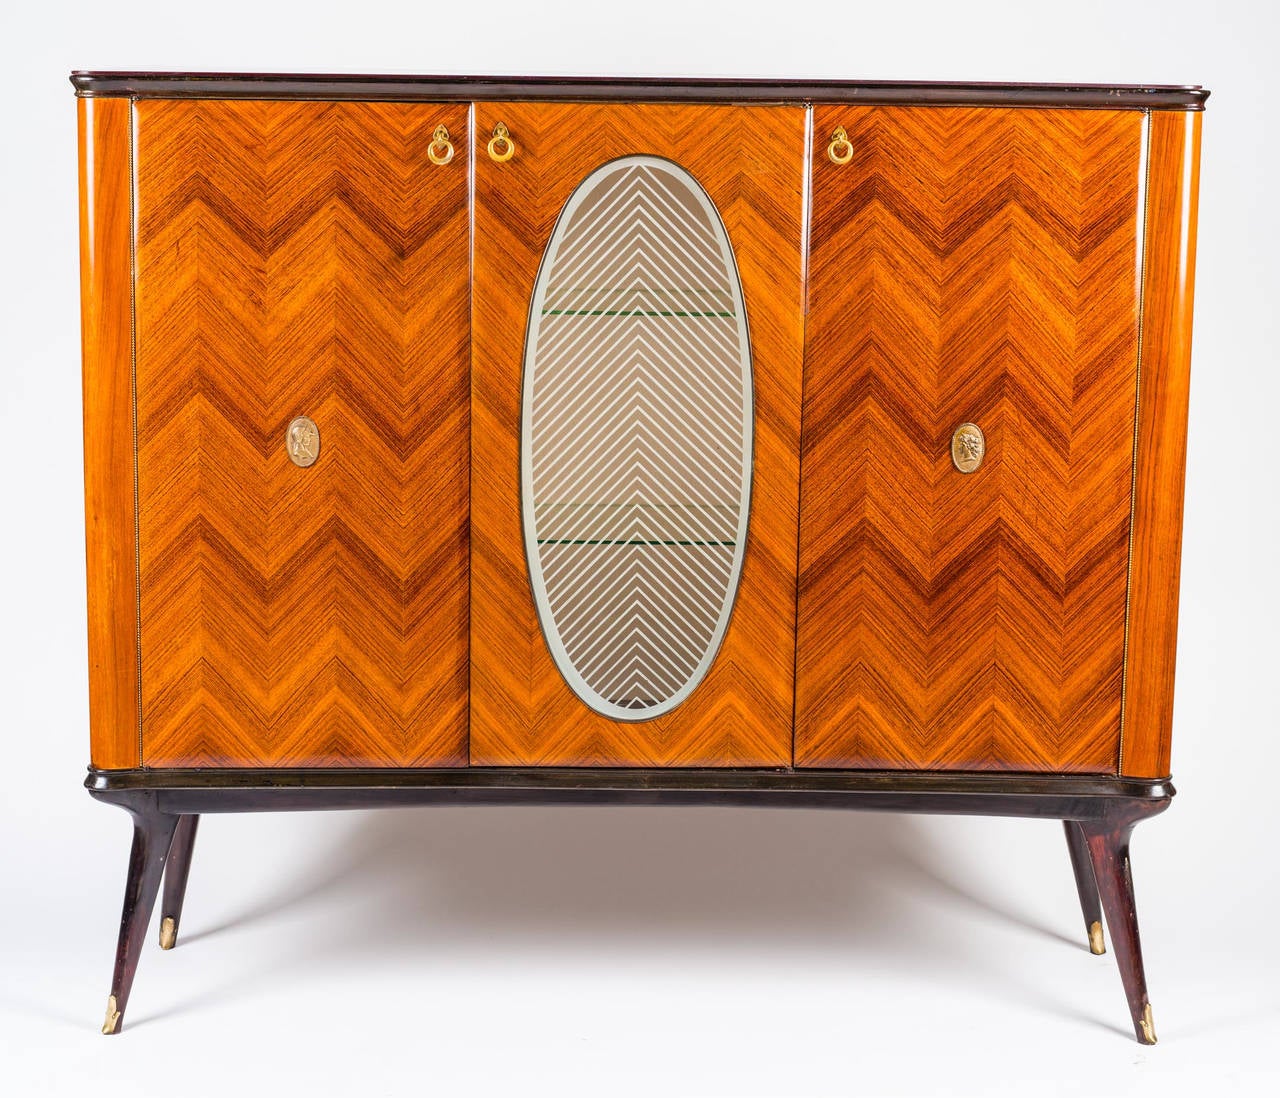 Adorable bar cabinet in rosewood designed by Paolo Buffa. The lines of the central glass continue those of the two doors.